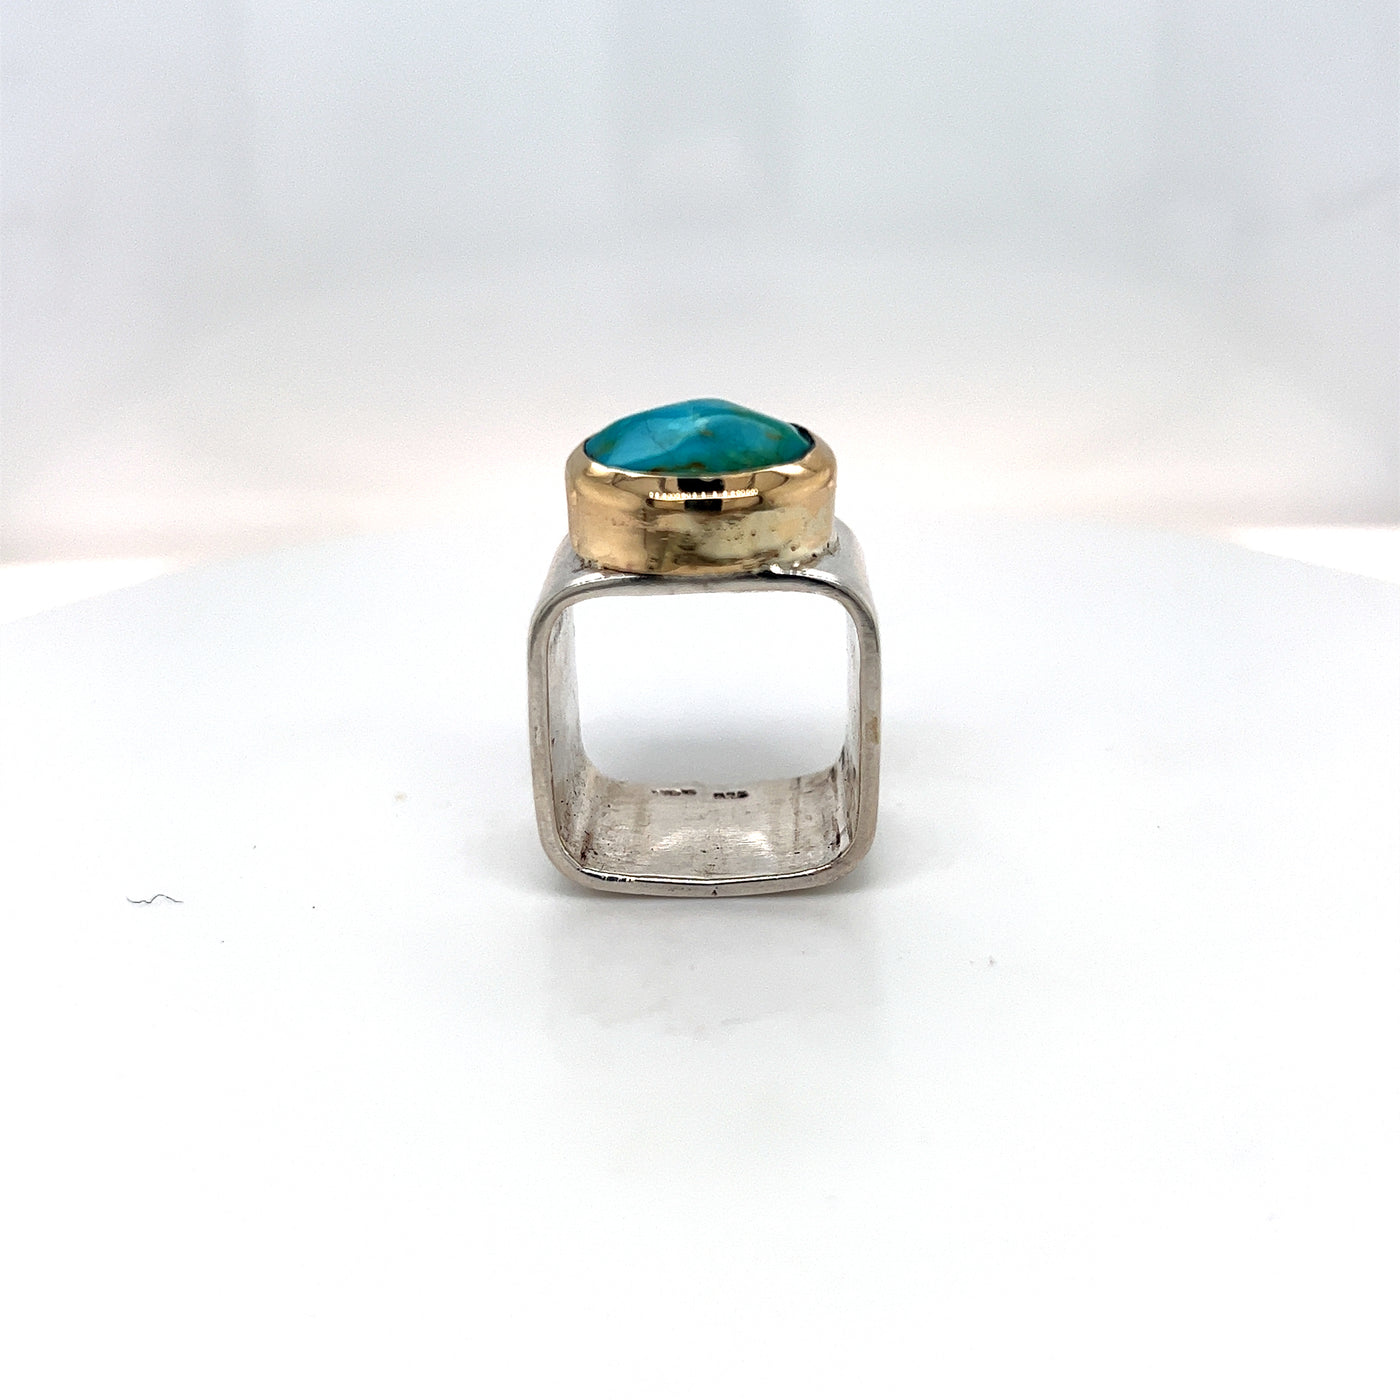 Turquoise TV ring